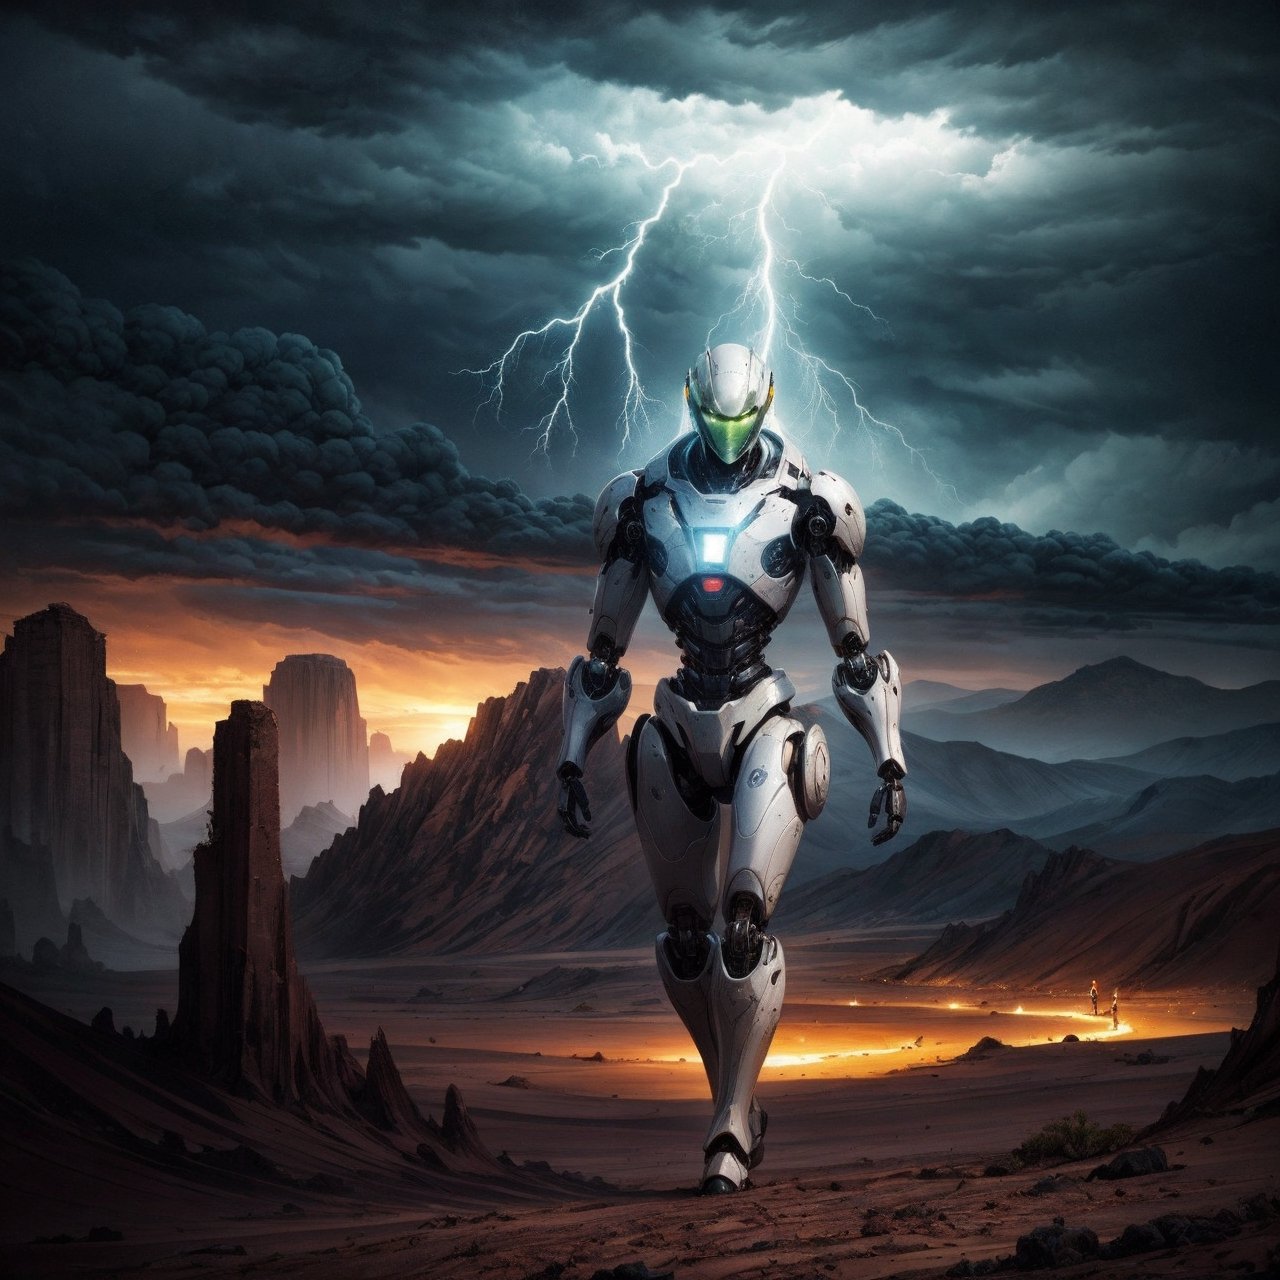 a giant, 20 ft tall android humanoid shaped robot is walking across the desert menacing. the android is metallic and machine like, rusty parts, shiny metal. a beautiful female human explorer is walking side by side with the robot. a detailed background of a vast alien desert landscape, sandstone ruins, sandstone hills, red sand, a stormy sky, dark menacing storm clouds, lightening illuminating the black clouds. windy, deserted, , SD 1.5, perfect hands,